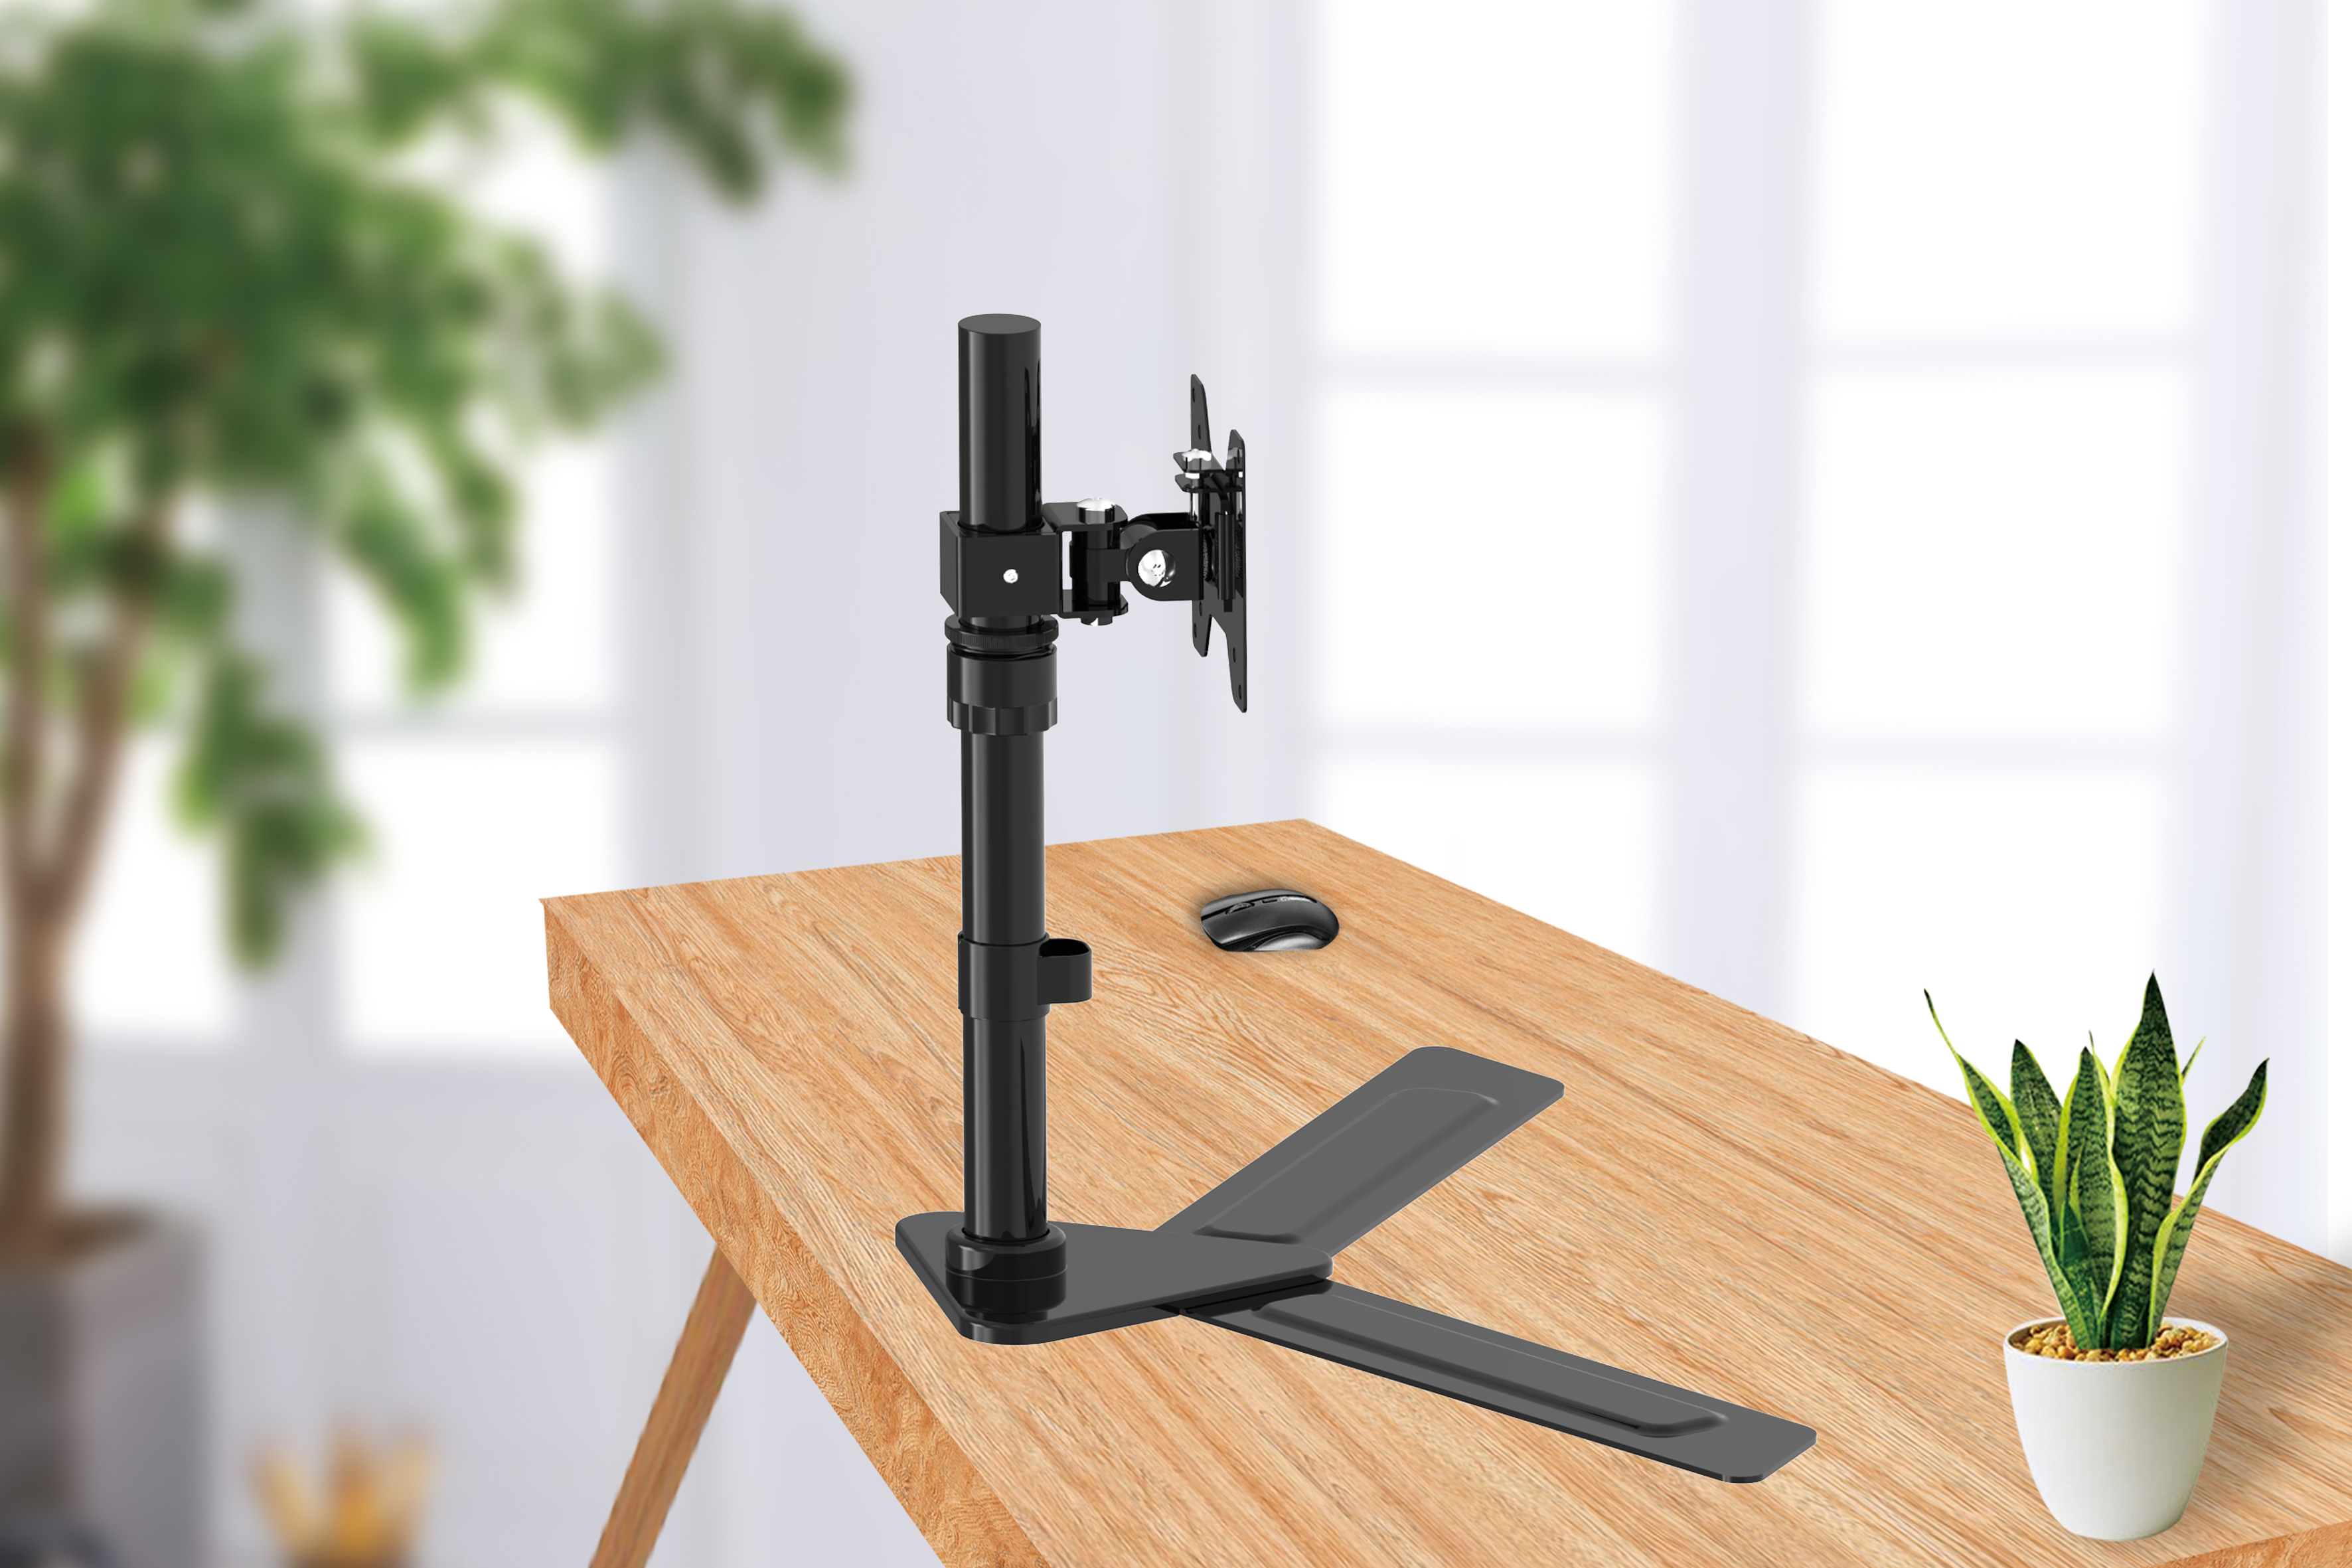 Cepter monitor mount on a table